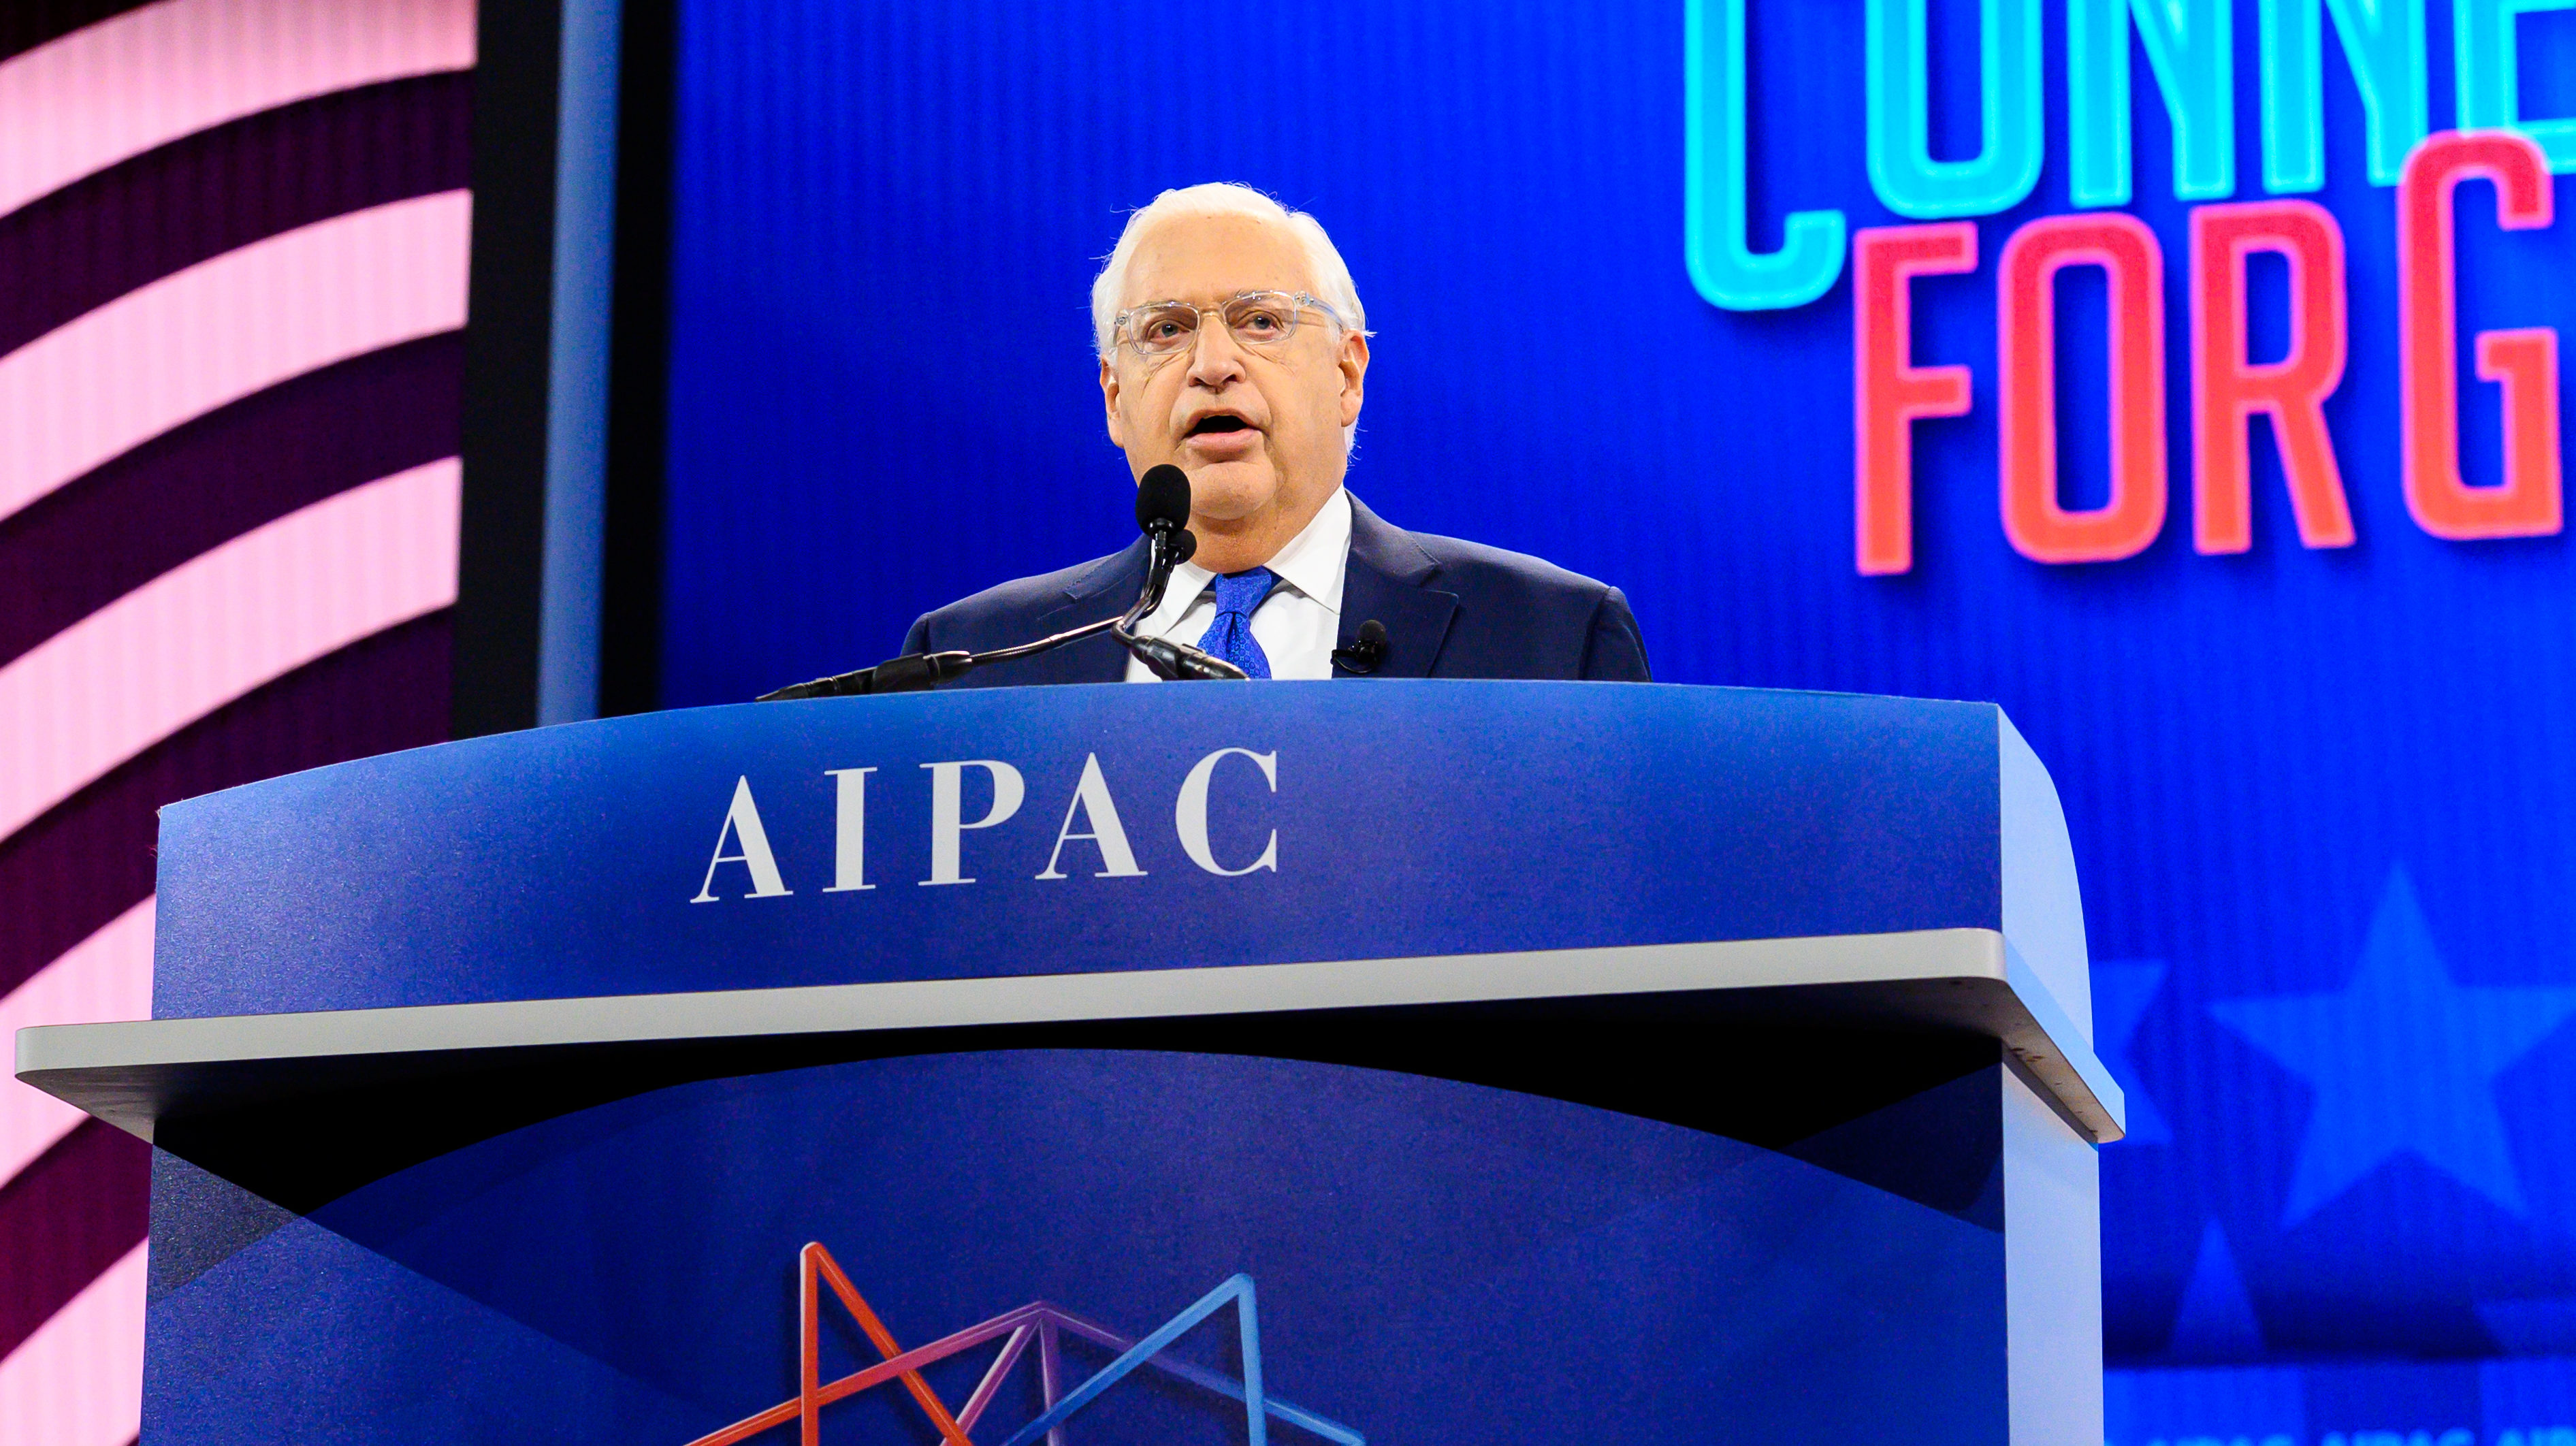 AIPAC Ad Affair Spiraling into Lightning Rod for Anti-Israel Voices